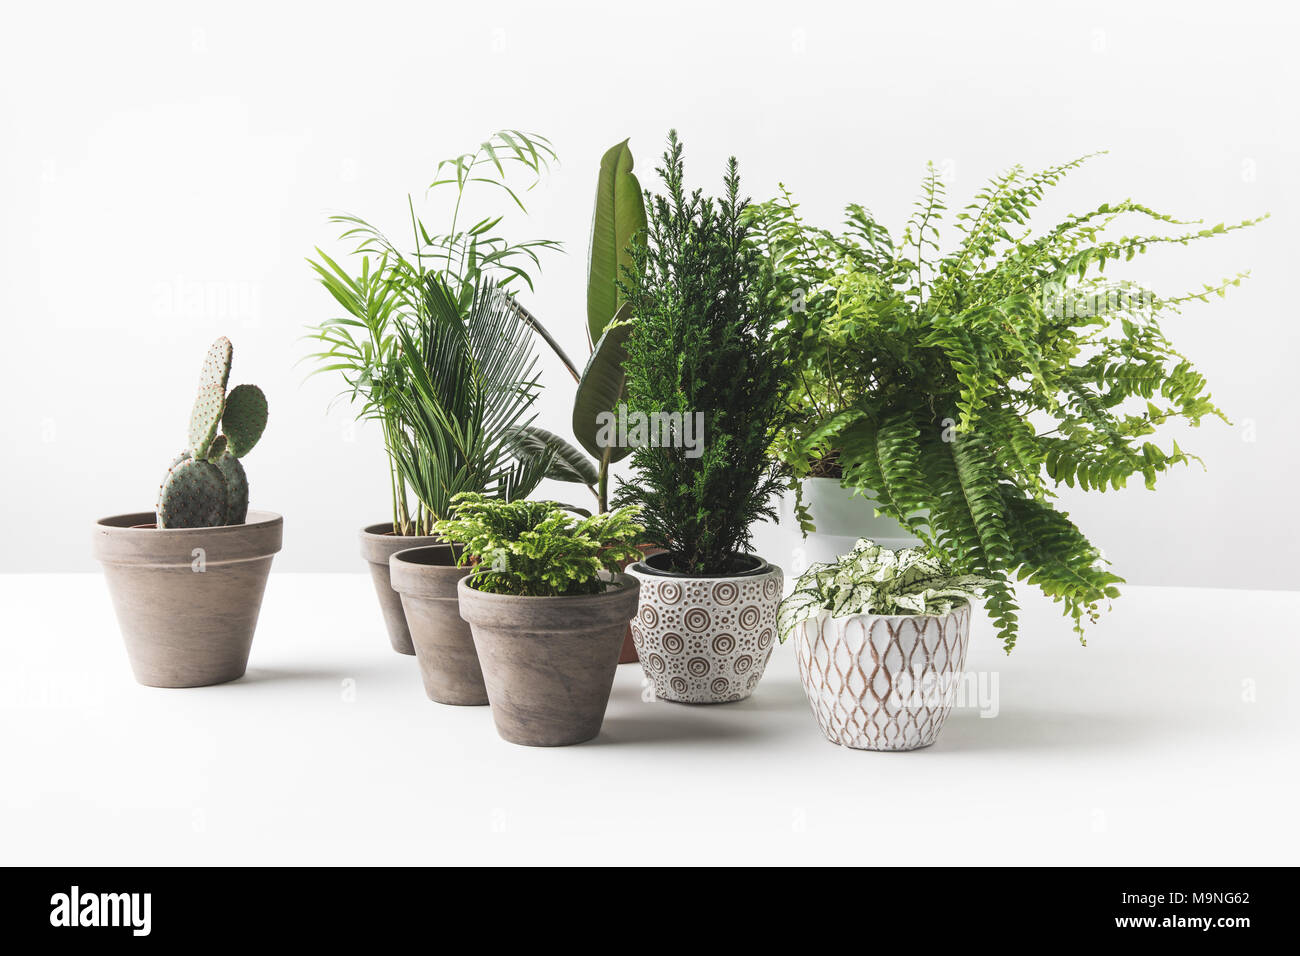 close-up view of various beautiful green houseplants in pots on white  Stock Photo